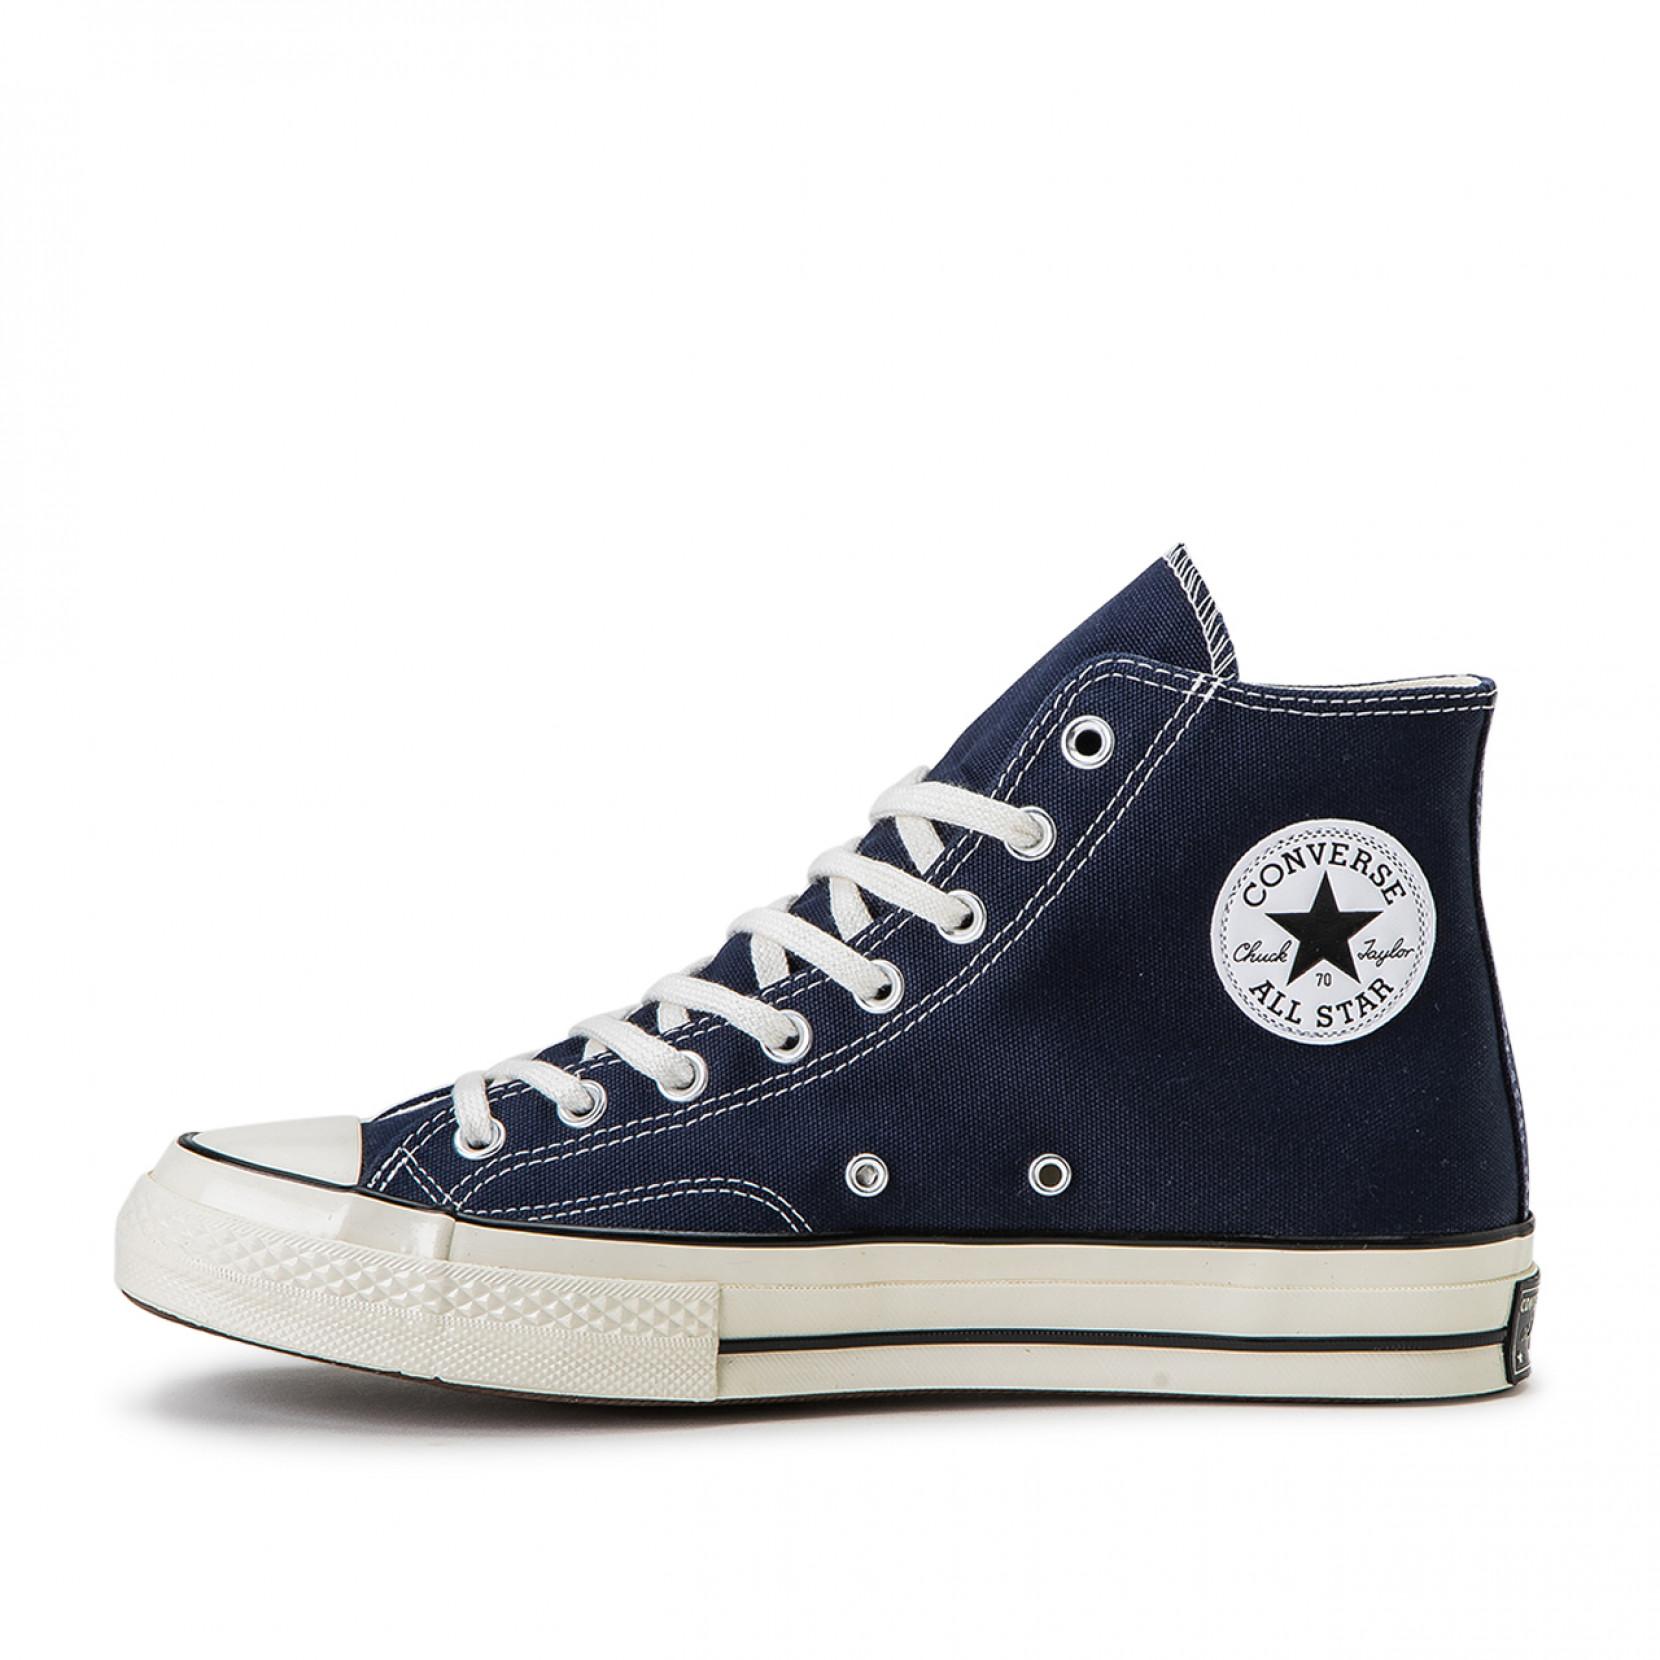 Converse Canvas Chuck Taylor 70 Hi in Navy (Blue) for Men - Lyst